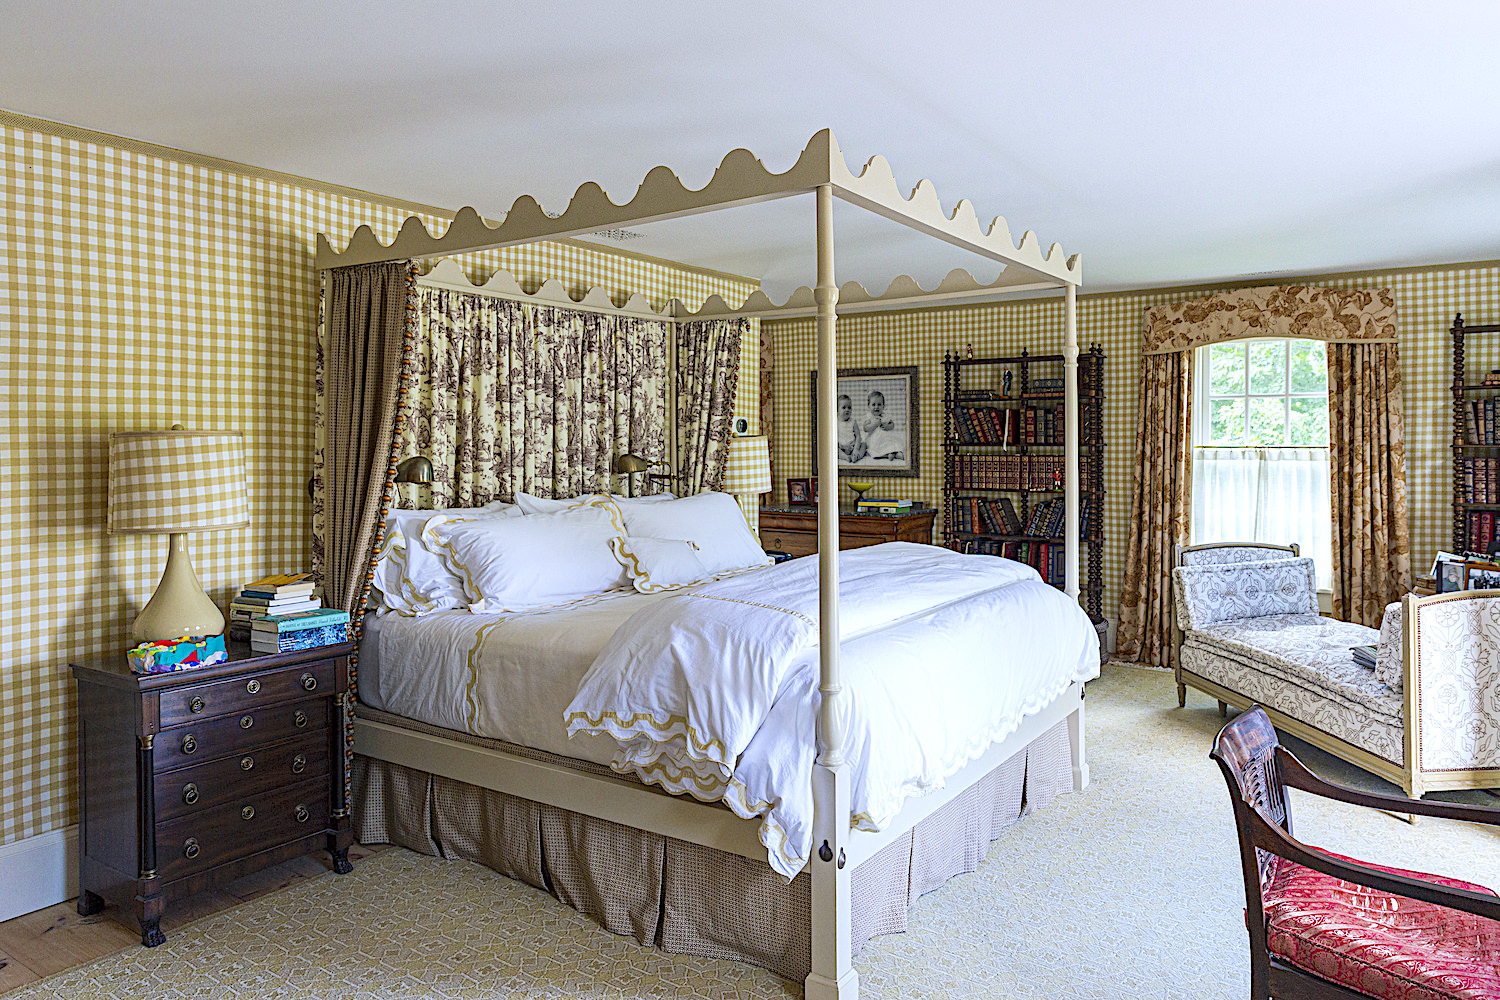 Darren Henault Millbrook master bedroom, photo by Stacey Bewkes for Quintessence